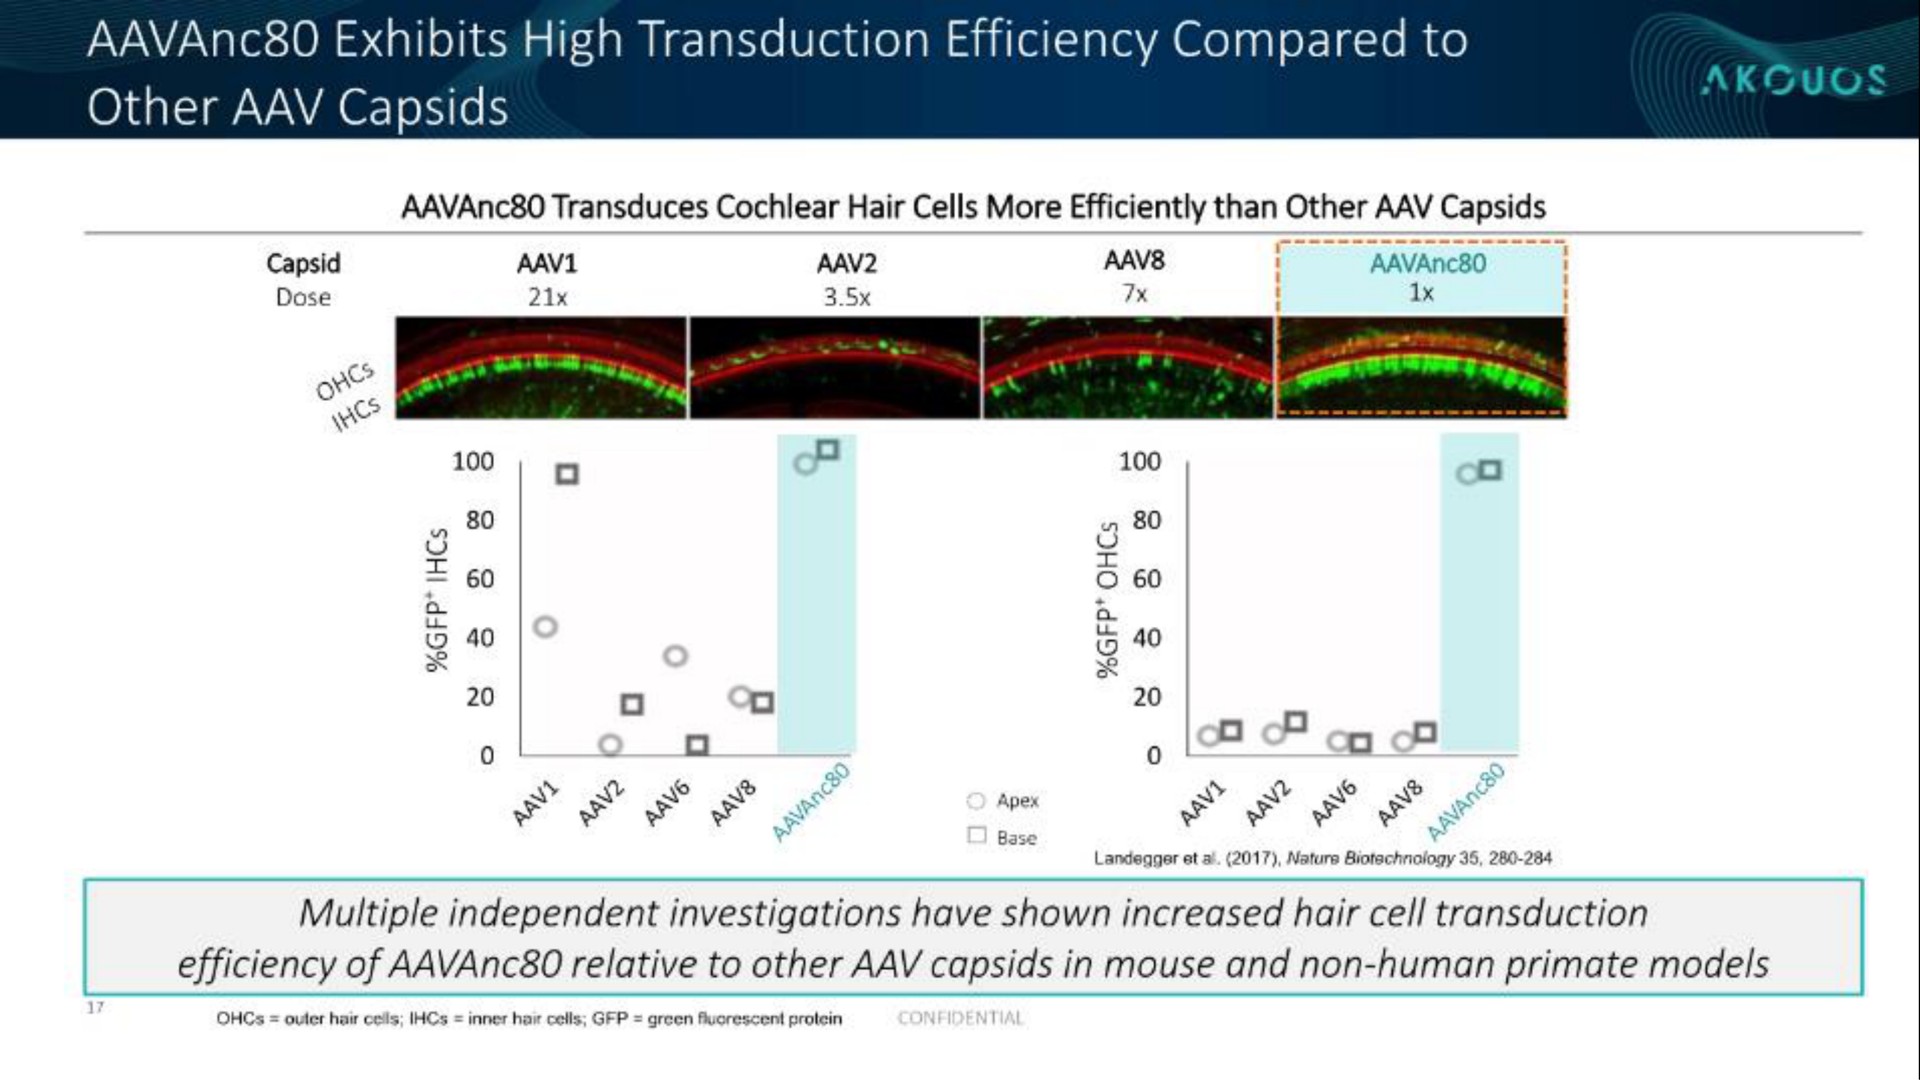 exhibits high transduction efficiency compared to other capsids | Akouos